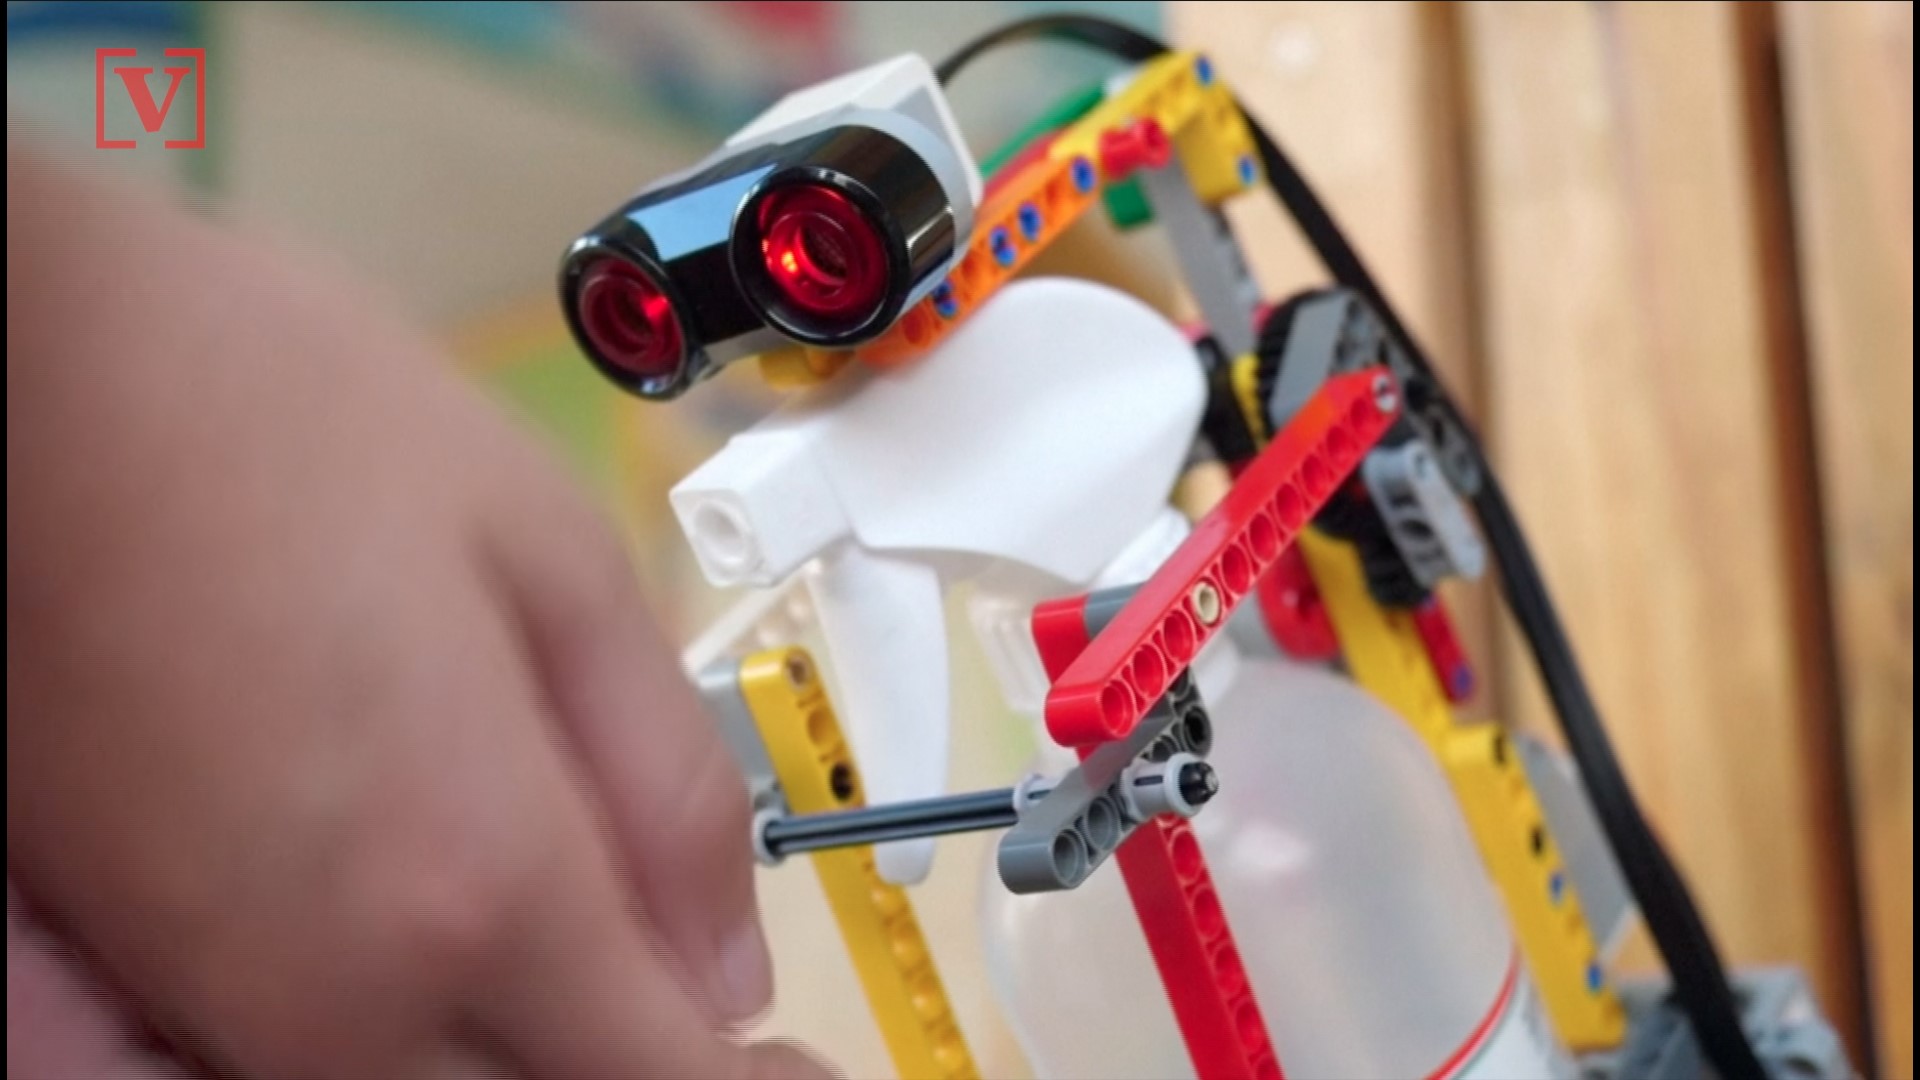 Amid coronavirus fears, students in Taiwan got creative when it comes to cleanliness with their Lego robot. Veuer's Justin Kircher has the story.